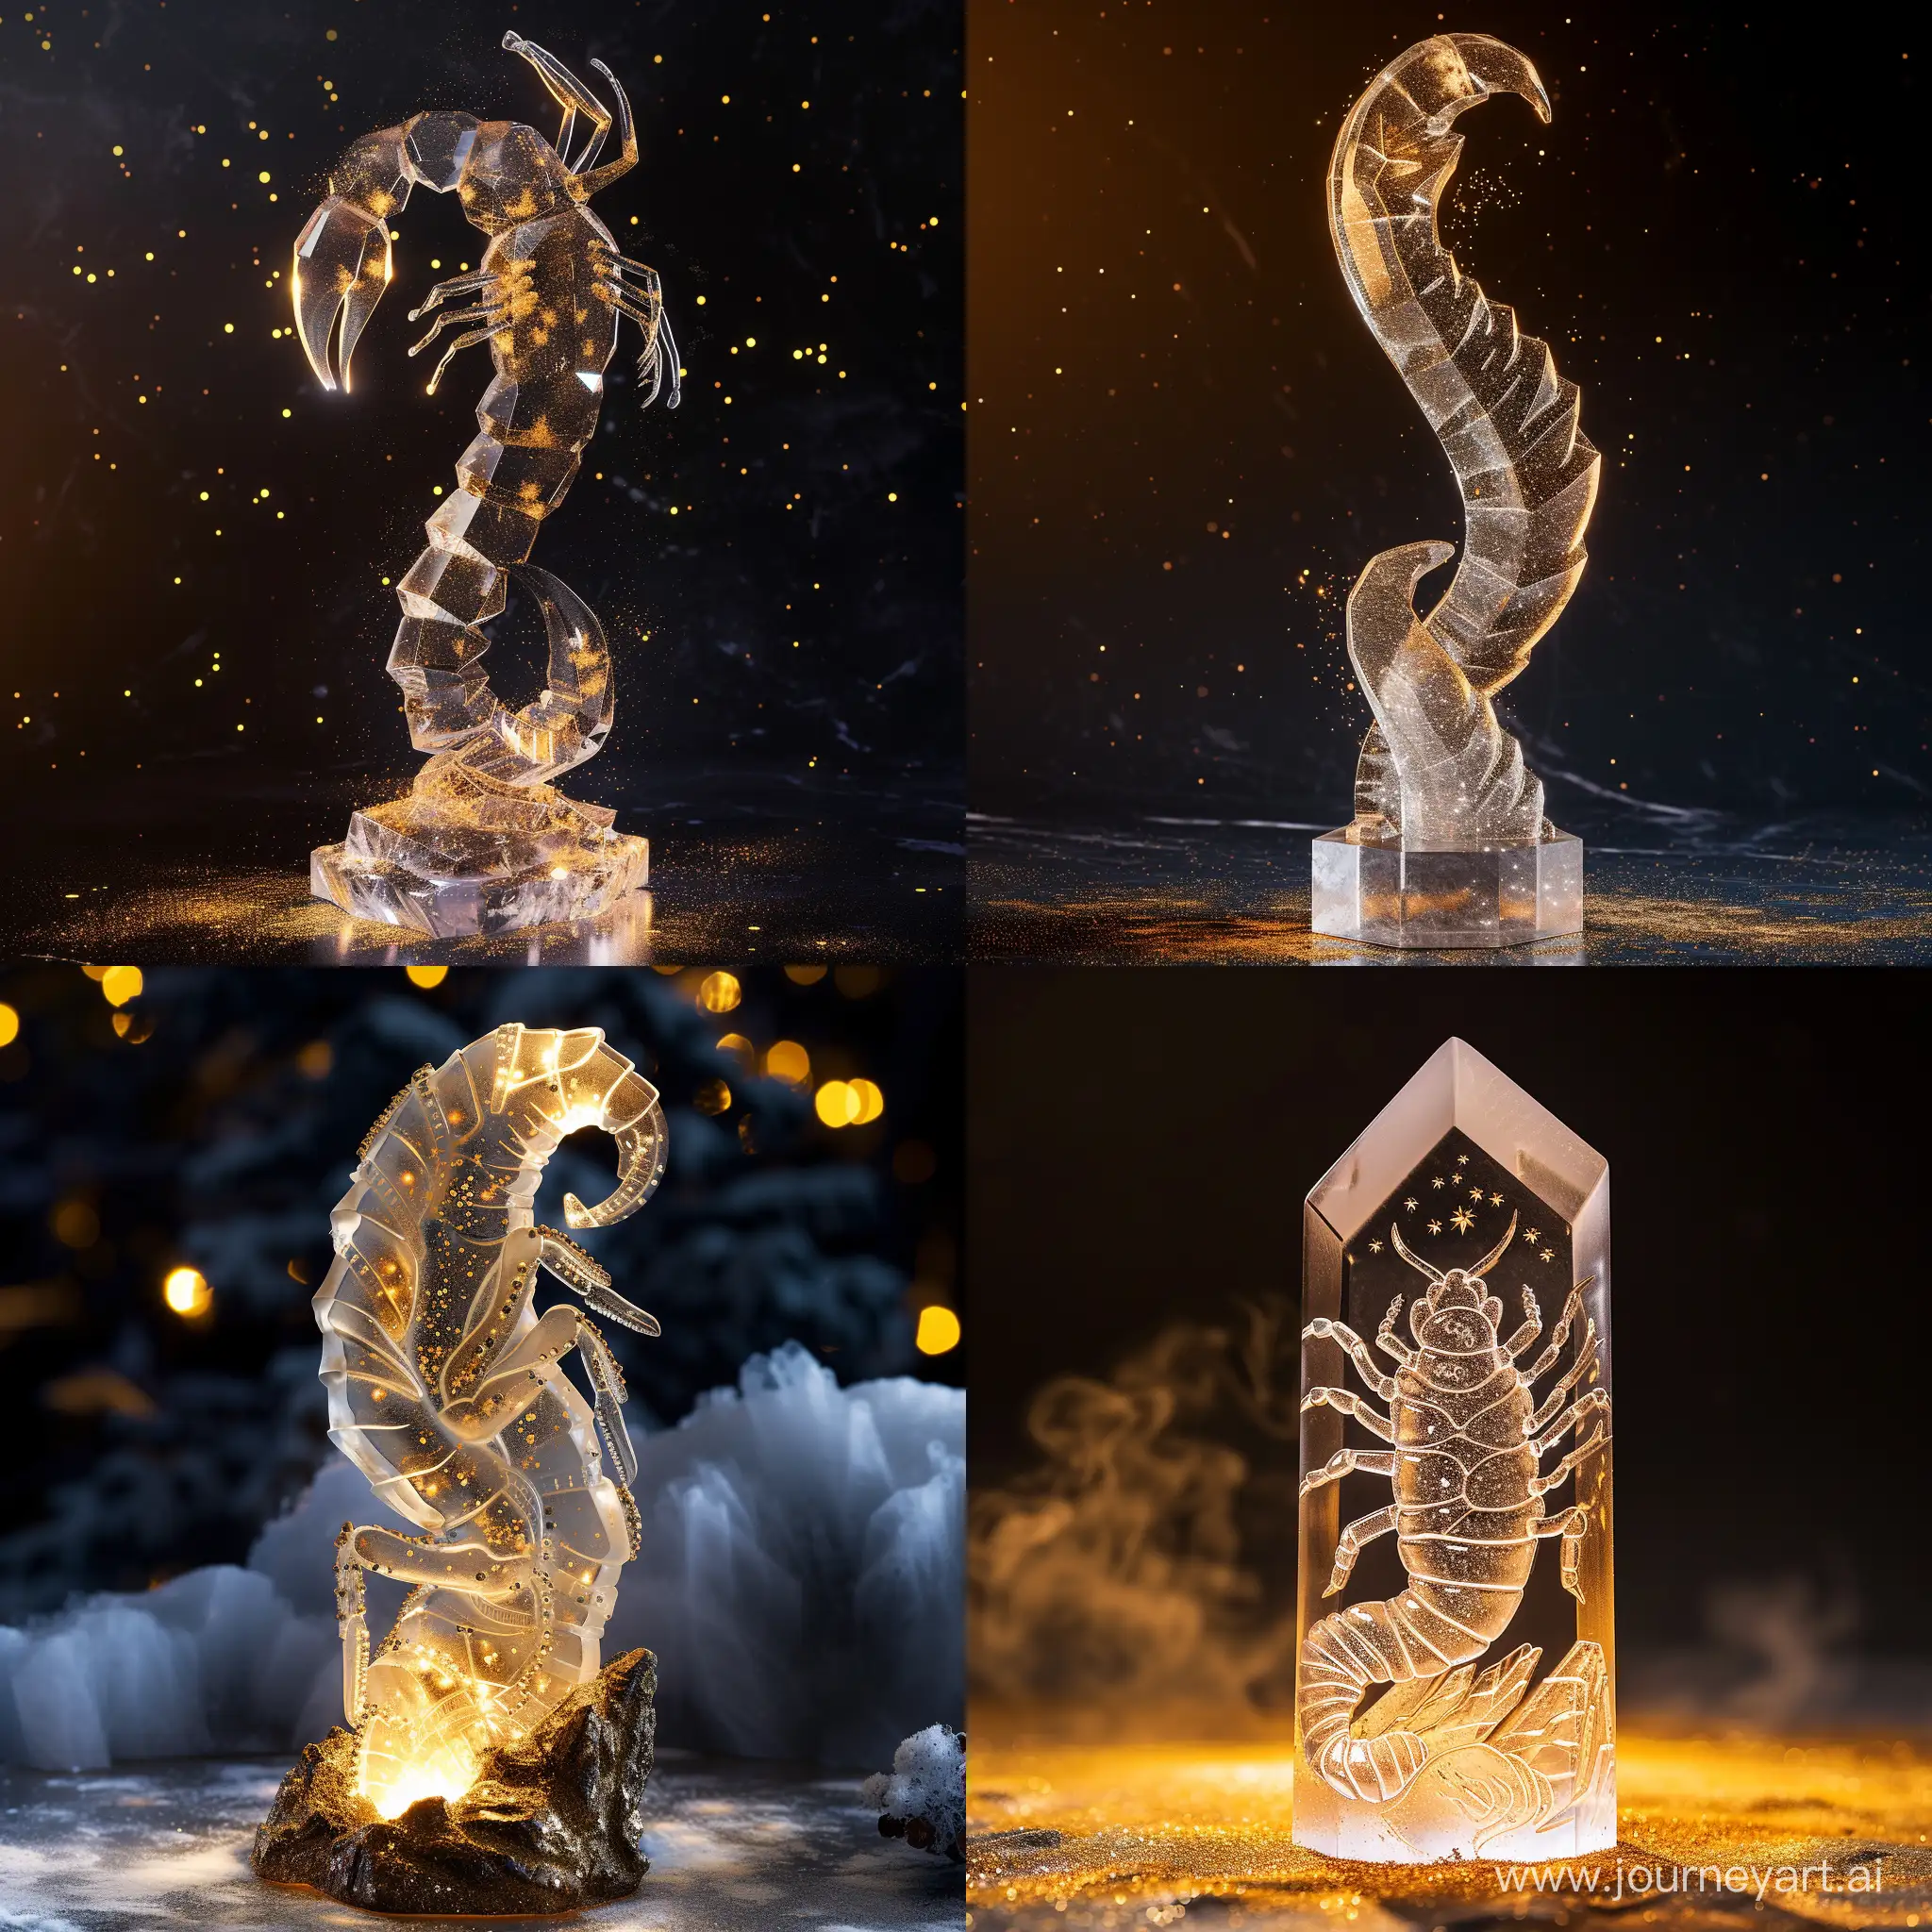 Exquisite-Crystal-Scorpio-Zodiac-Statuette-in-Nighttime-Setting-with-Gold-Dust-Accents